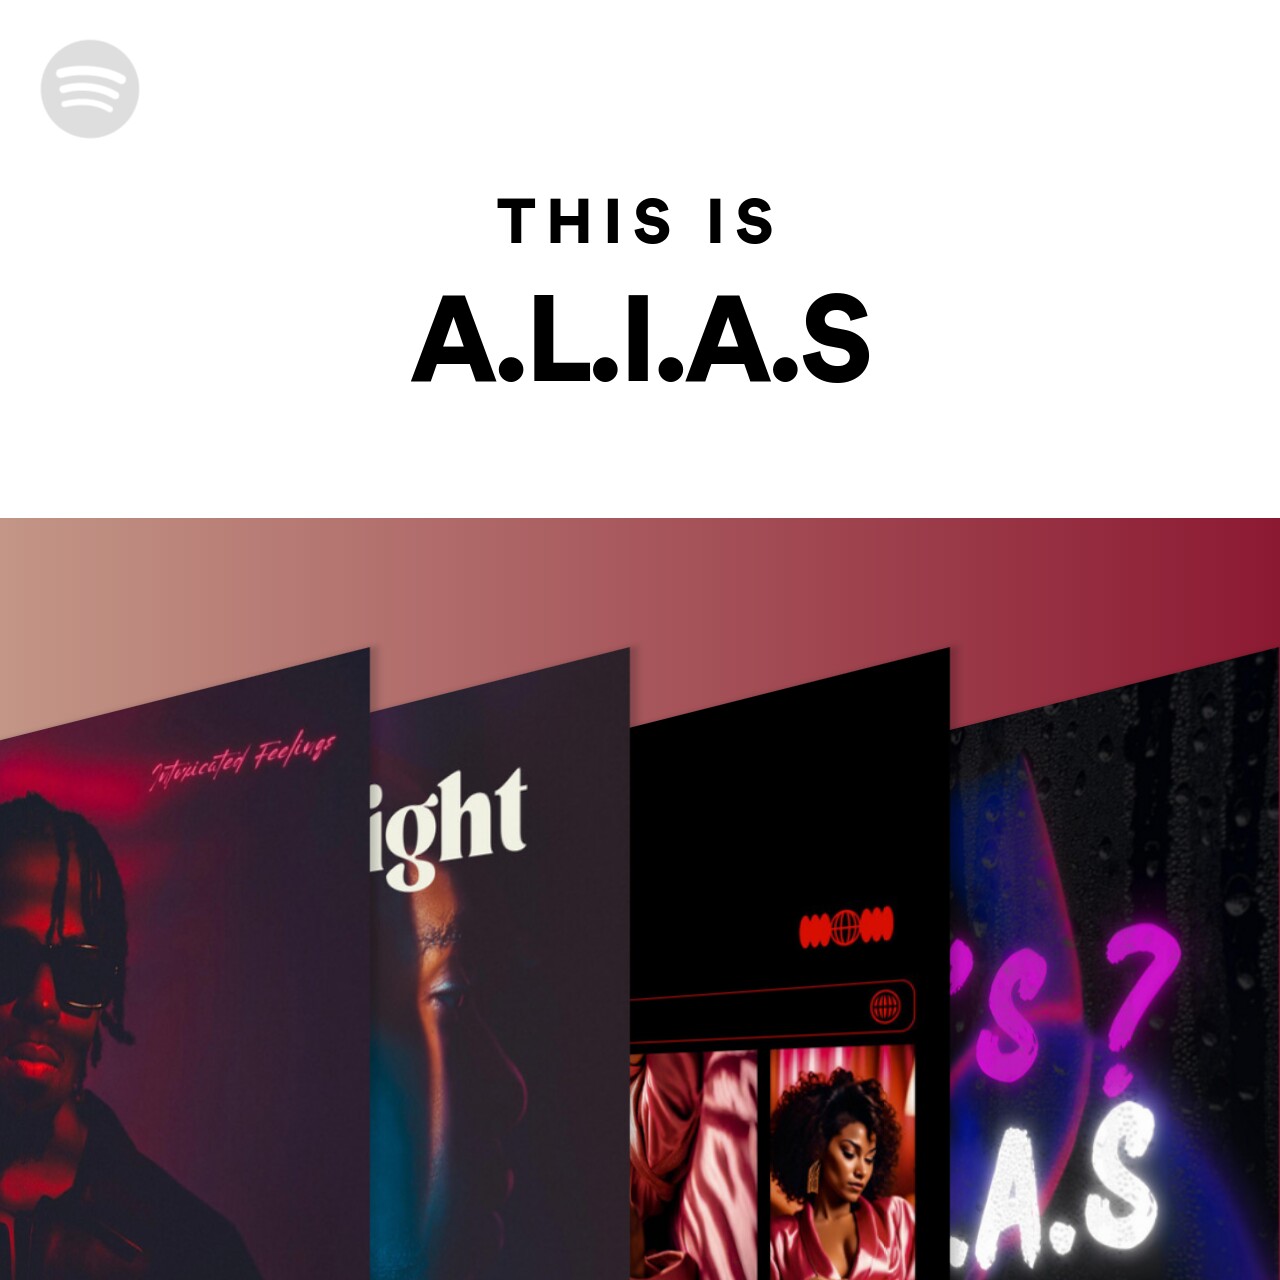 This Is A.L.I.A.S